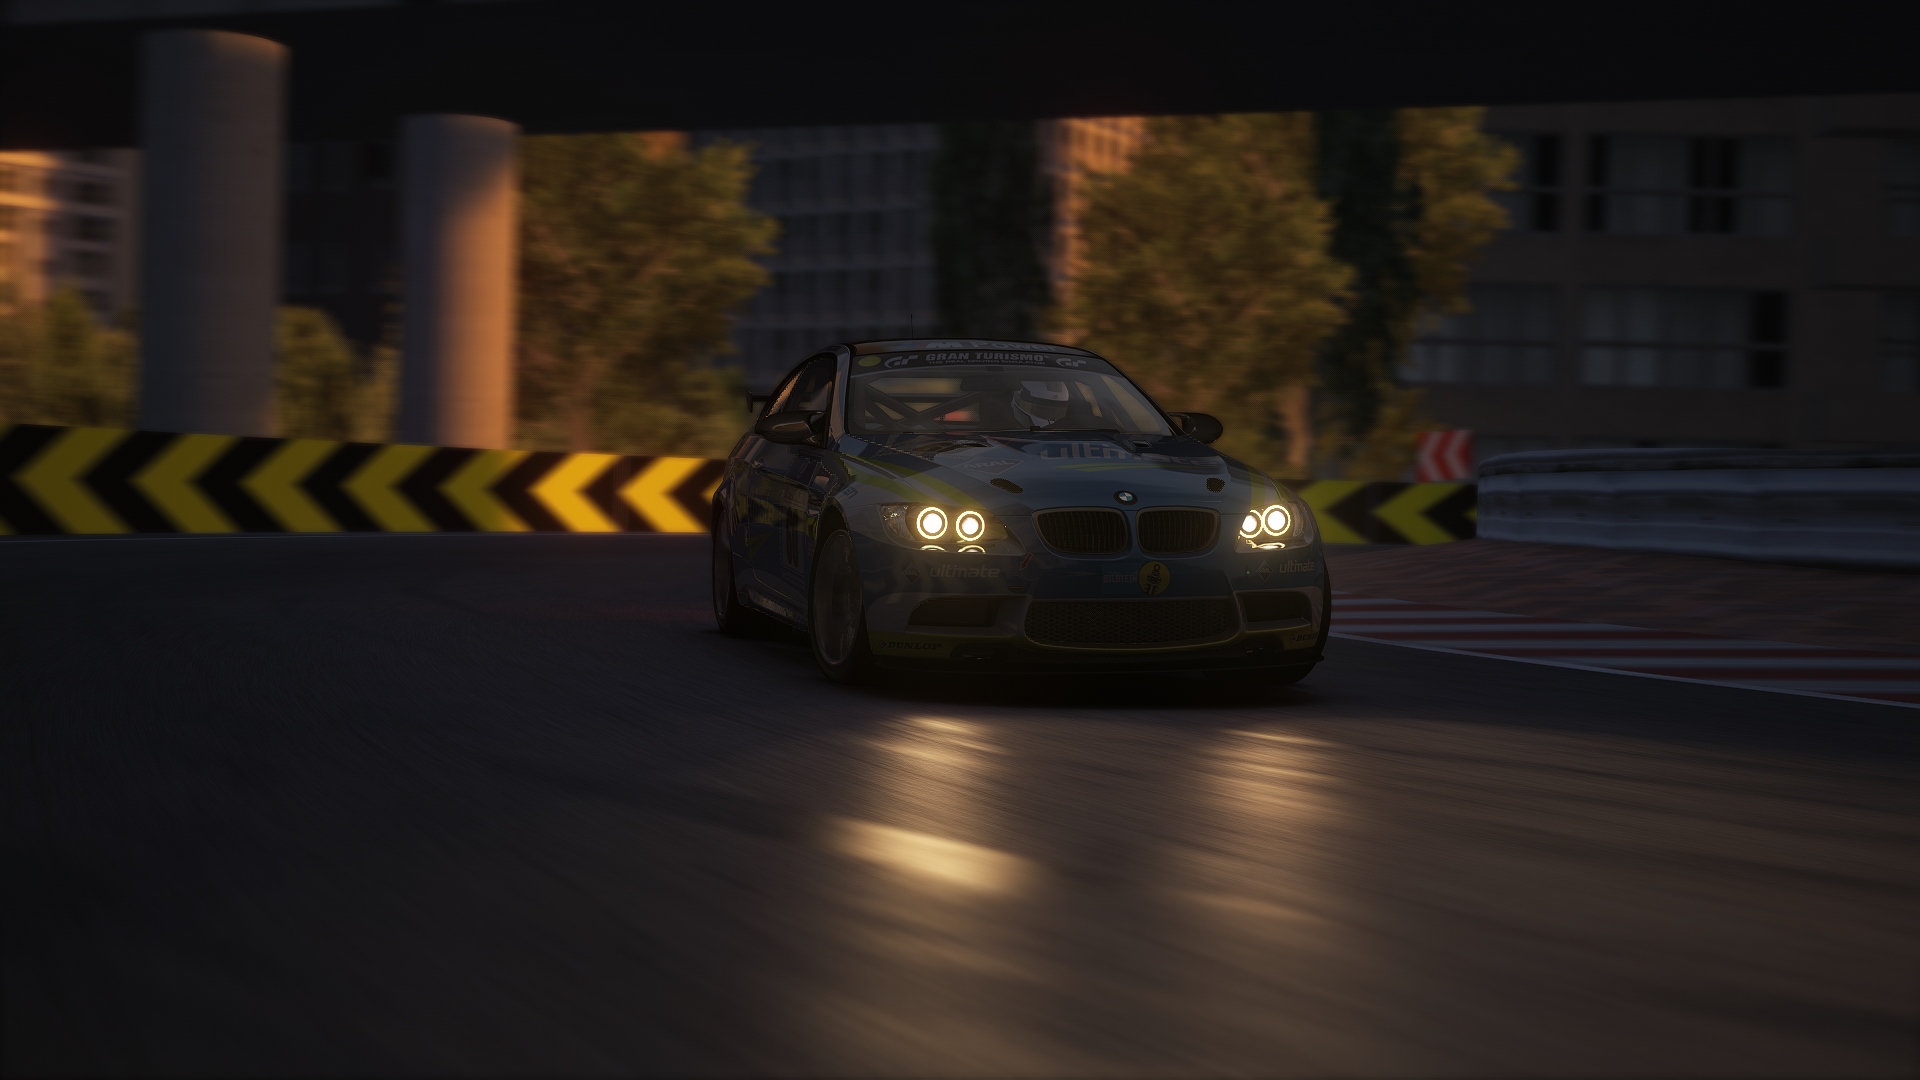 Screenshot_accr_bmw_m3_e92_gt4_special_stage_route_5_29-5-121-0-57-48.jpg